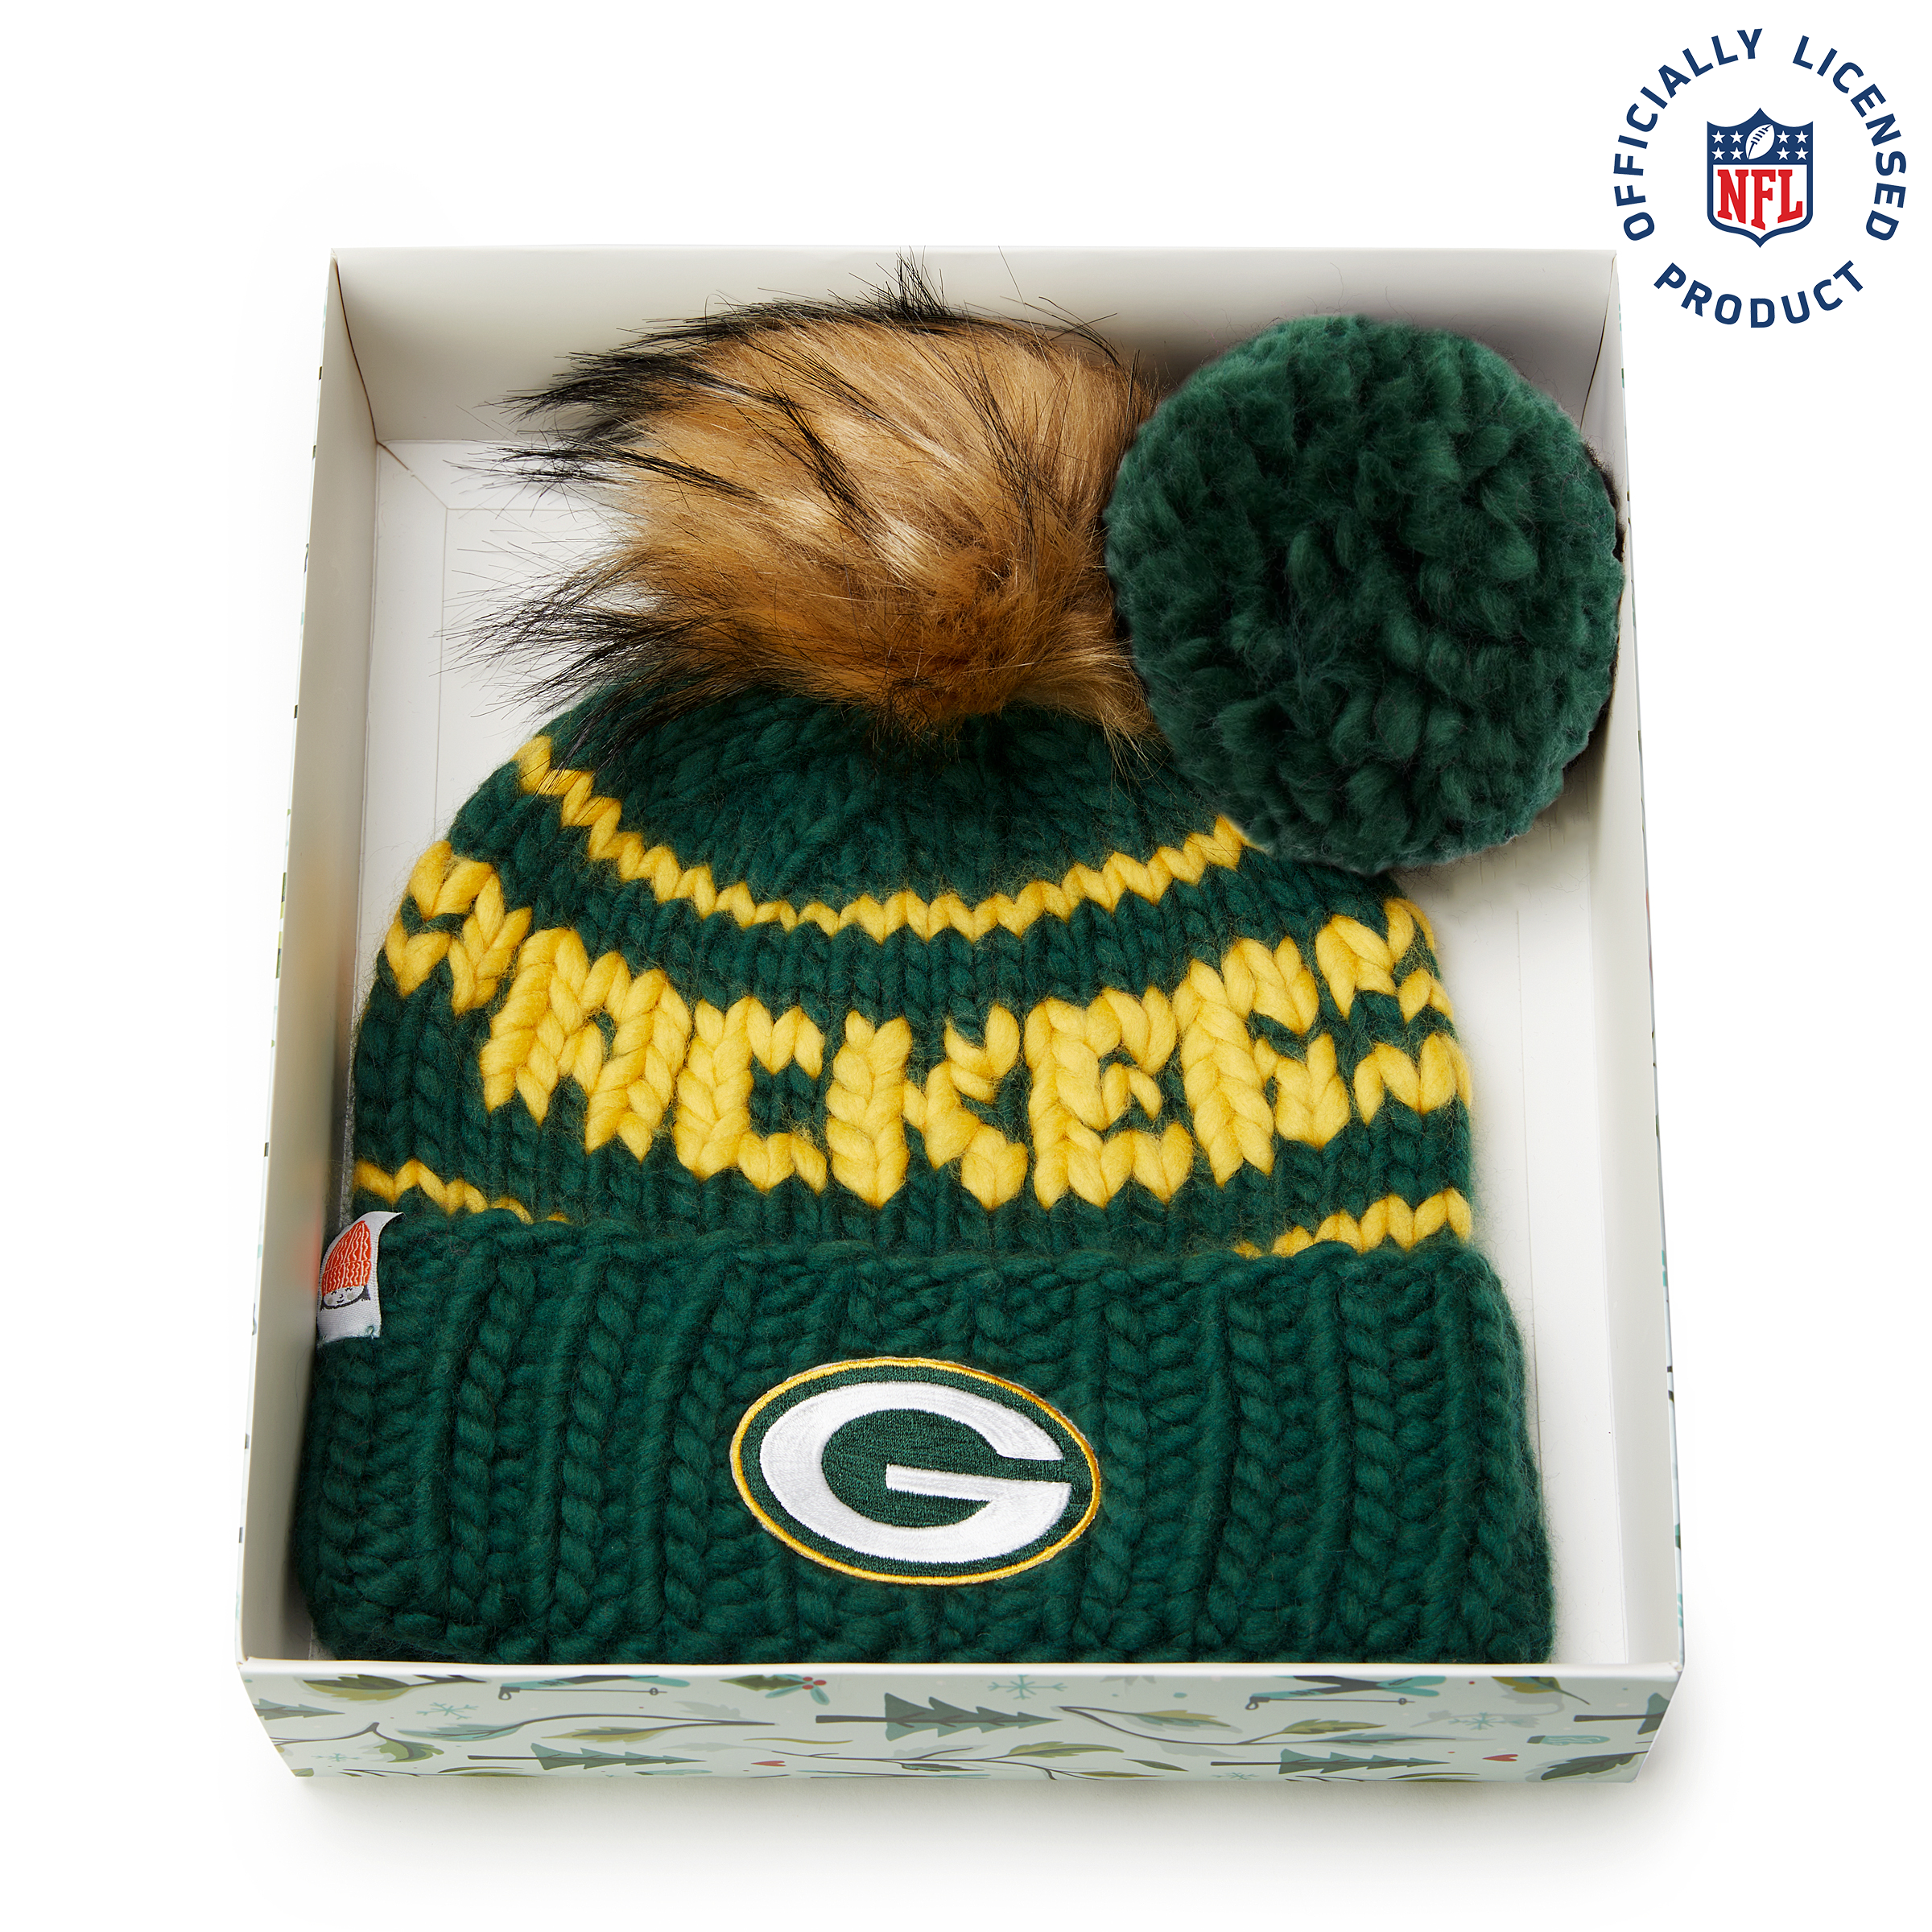 The Packers NFL Beanie Gift Set